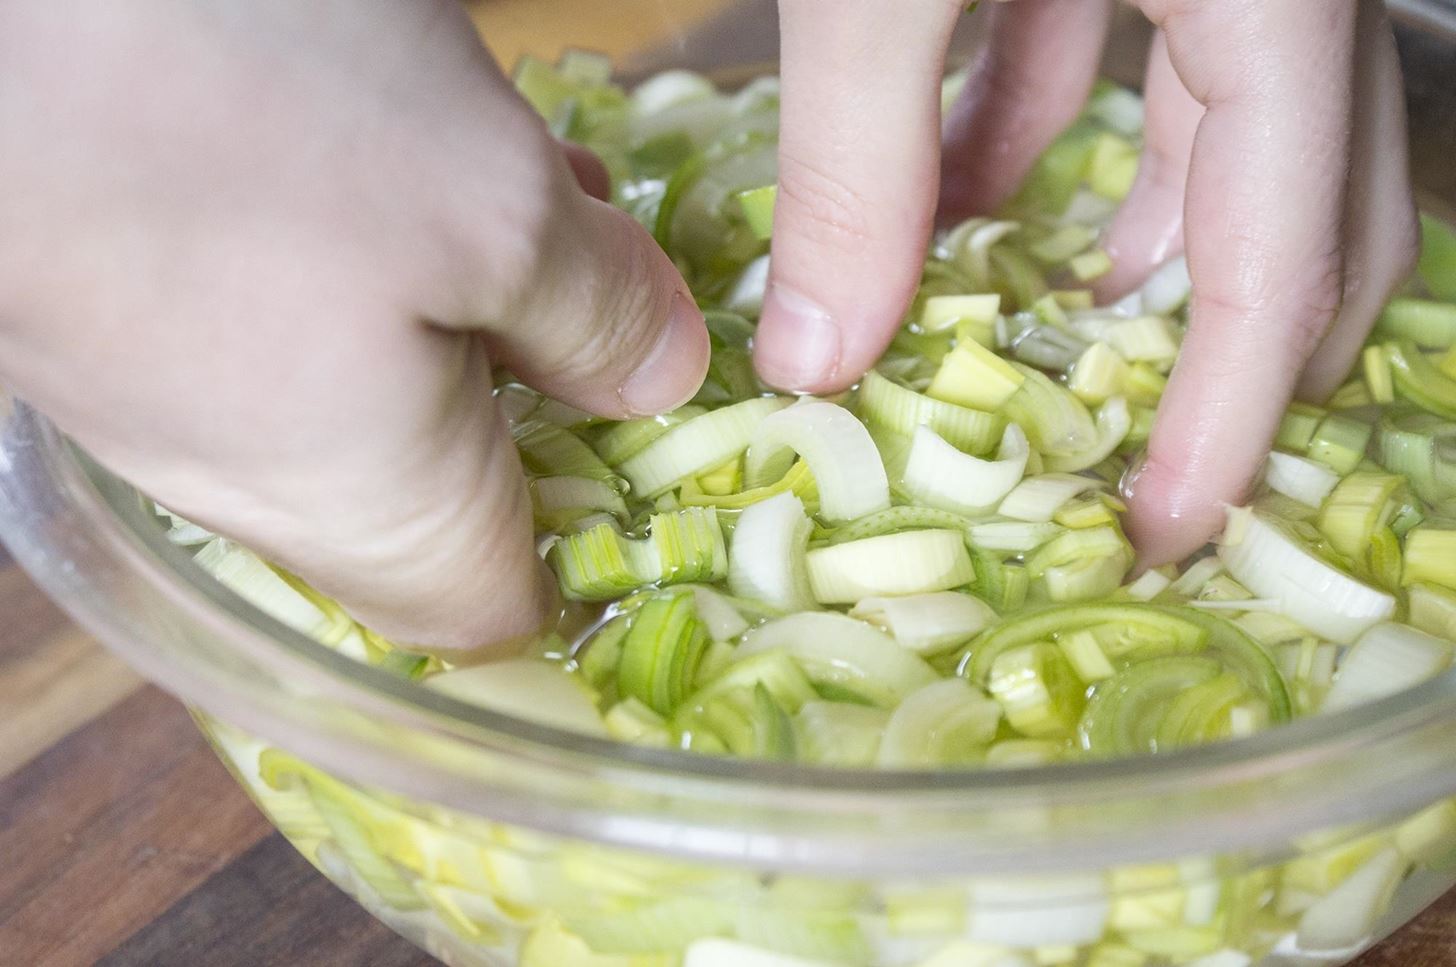 Save Time Prepping Veggies with These Insider Tricks